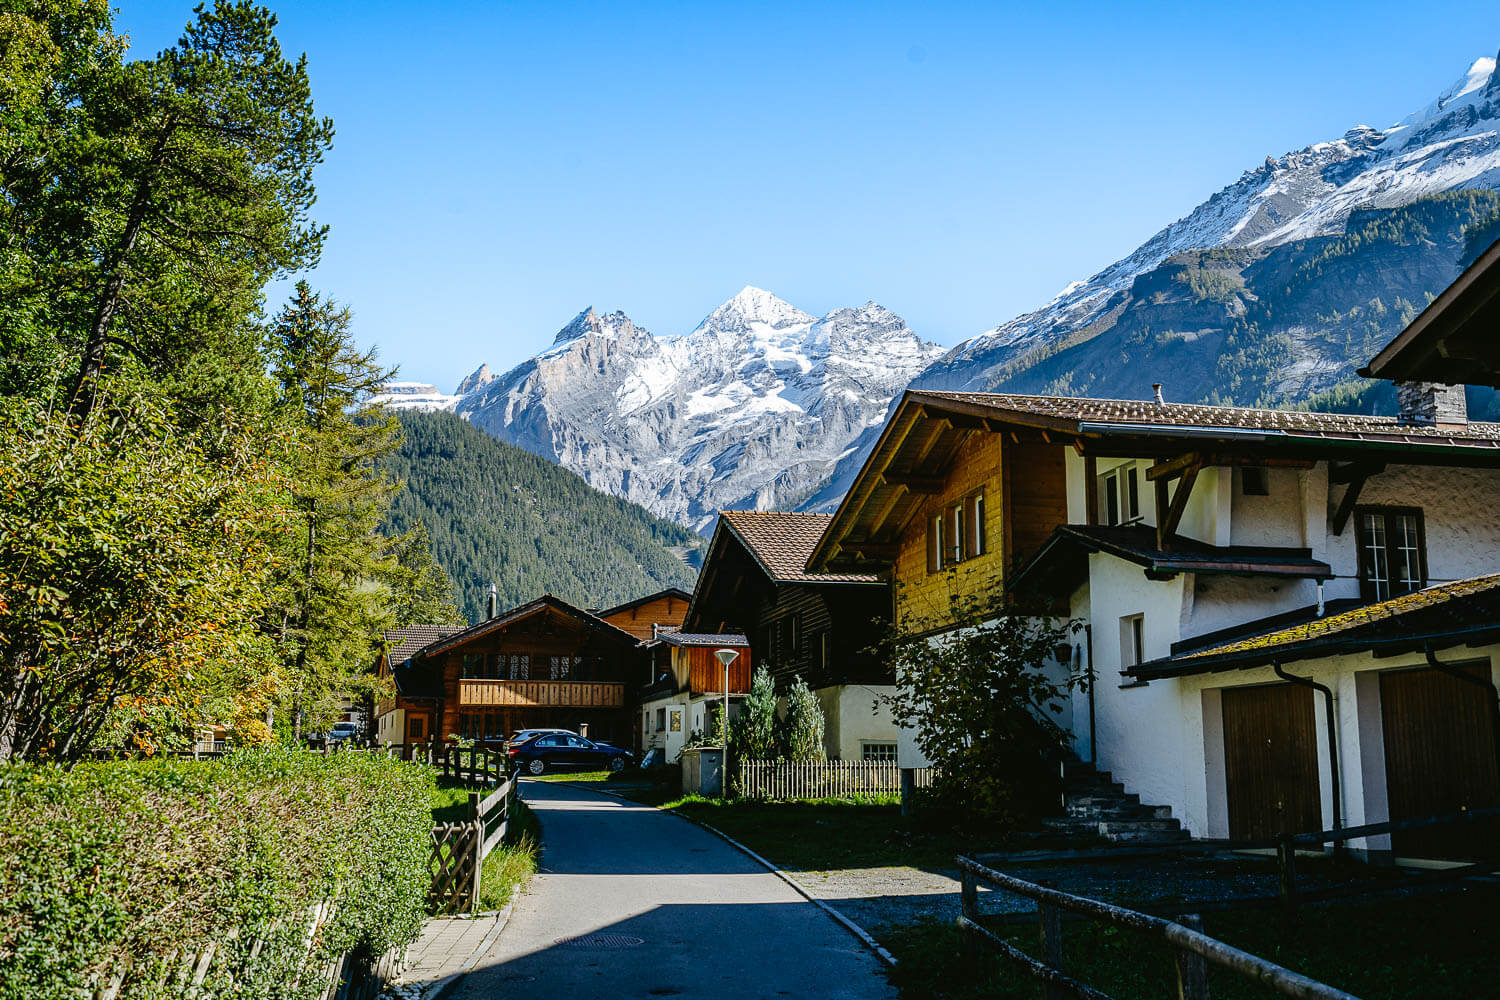 The path to the cable car station in Kandersteg